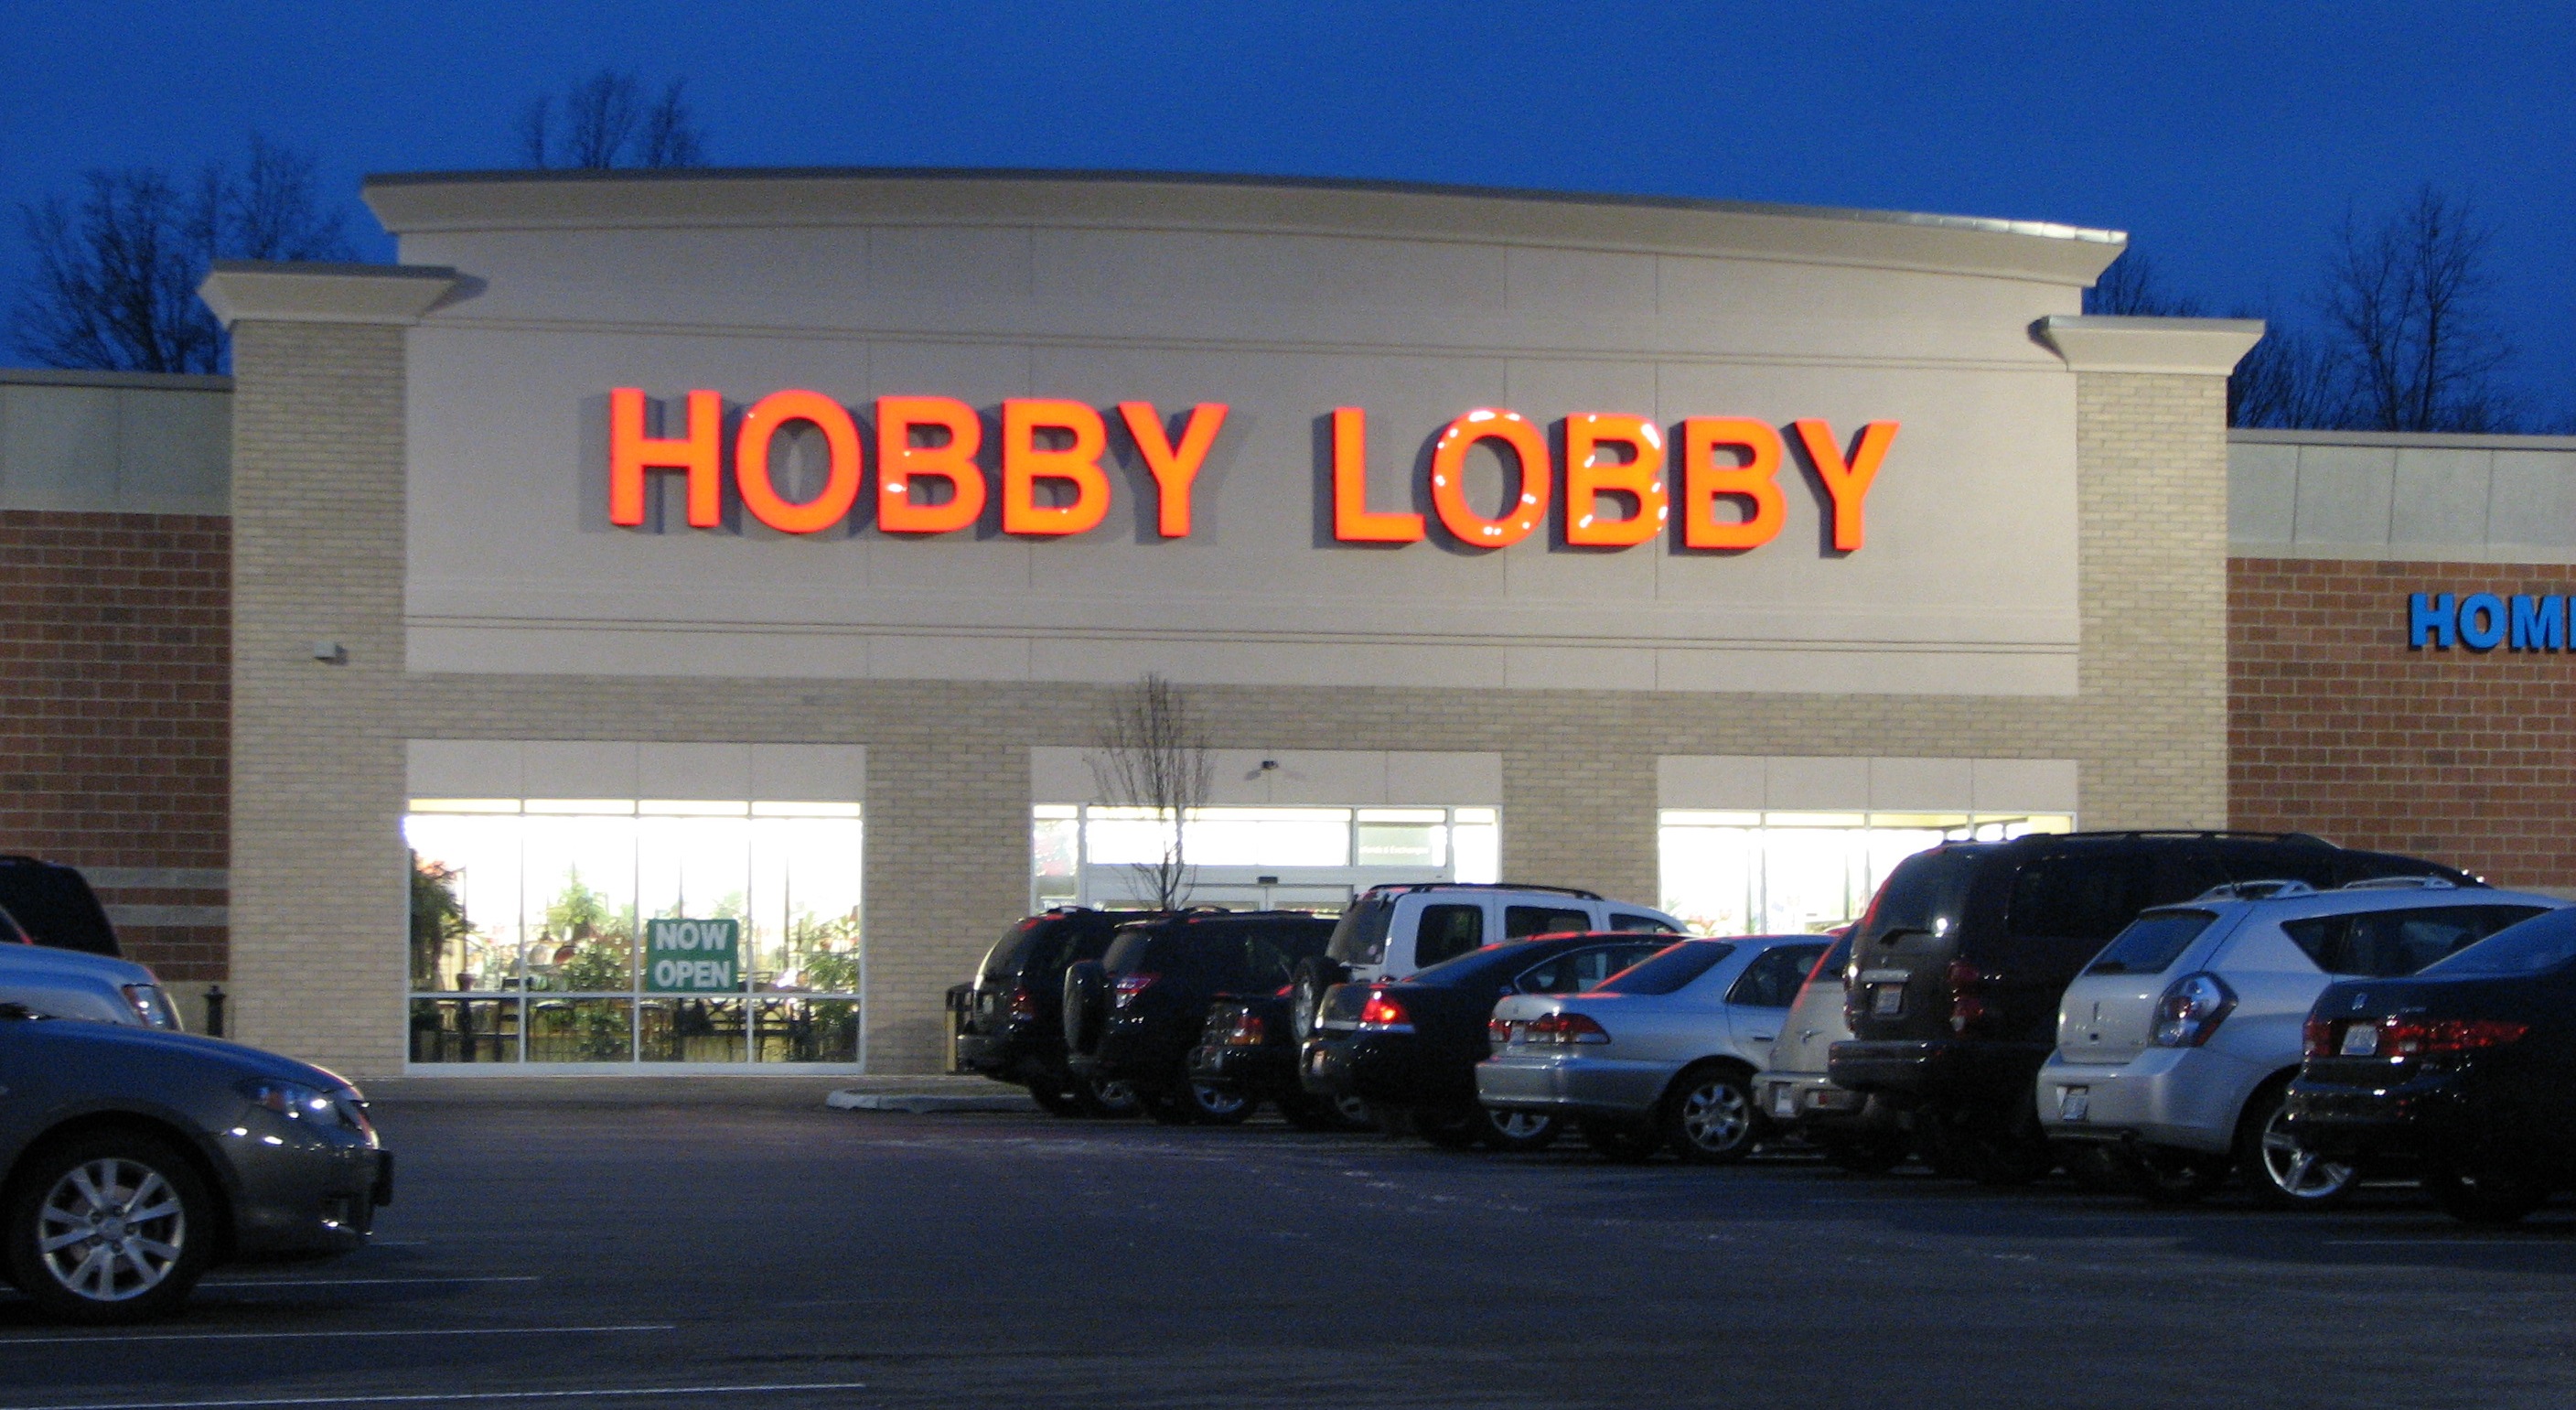 BREAKING: HOBBY LOBBY CLOSING ALL 900+ STORES NATIONWIDE, 43,000 LAID OFF